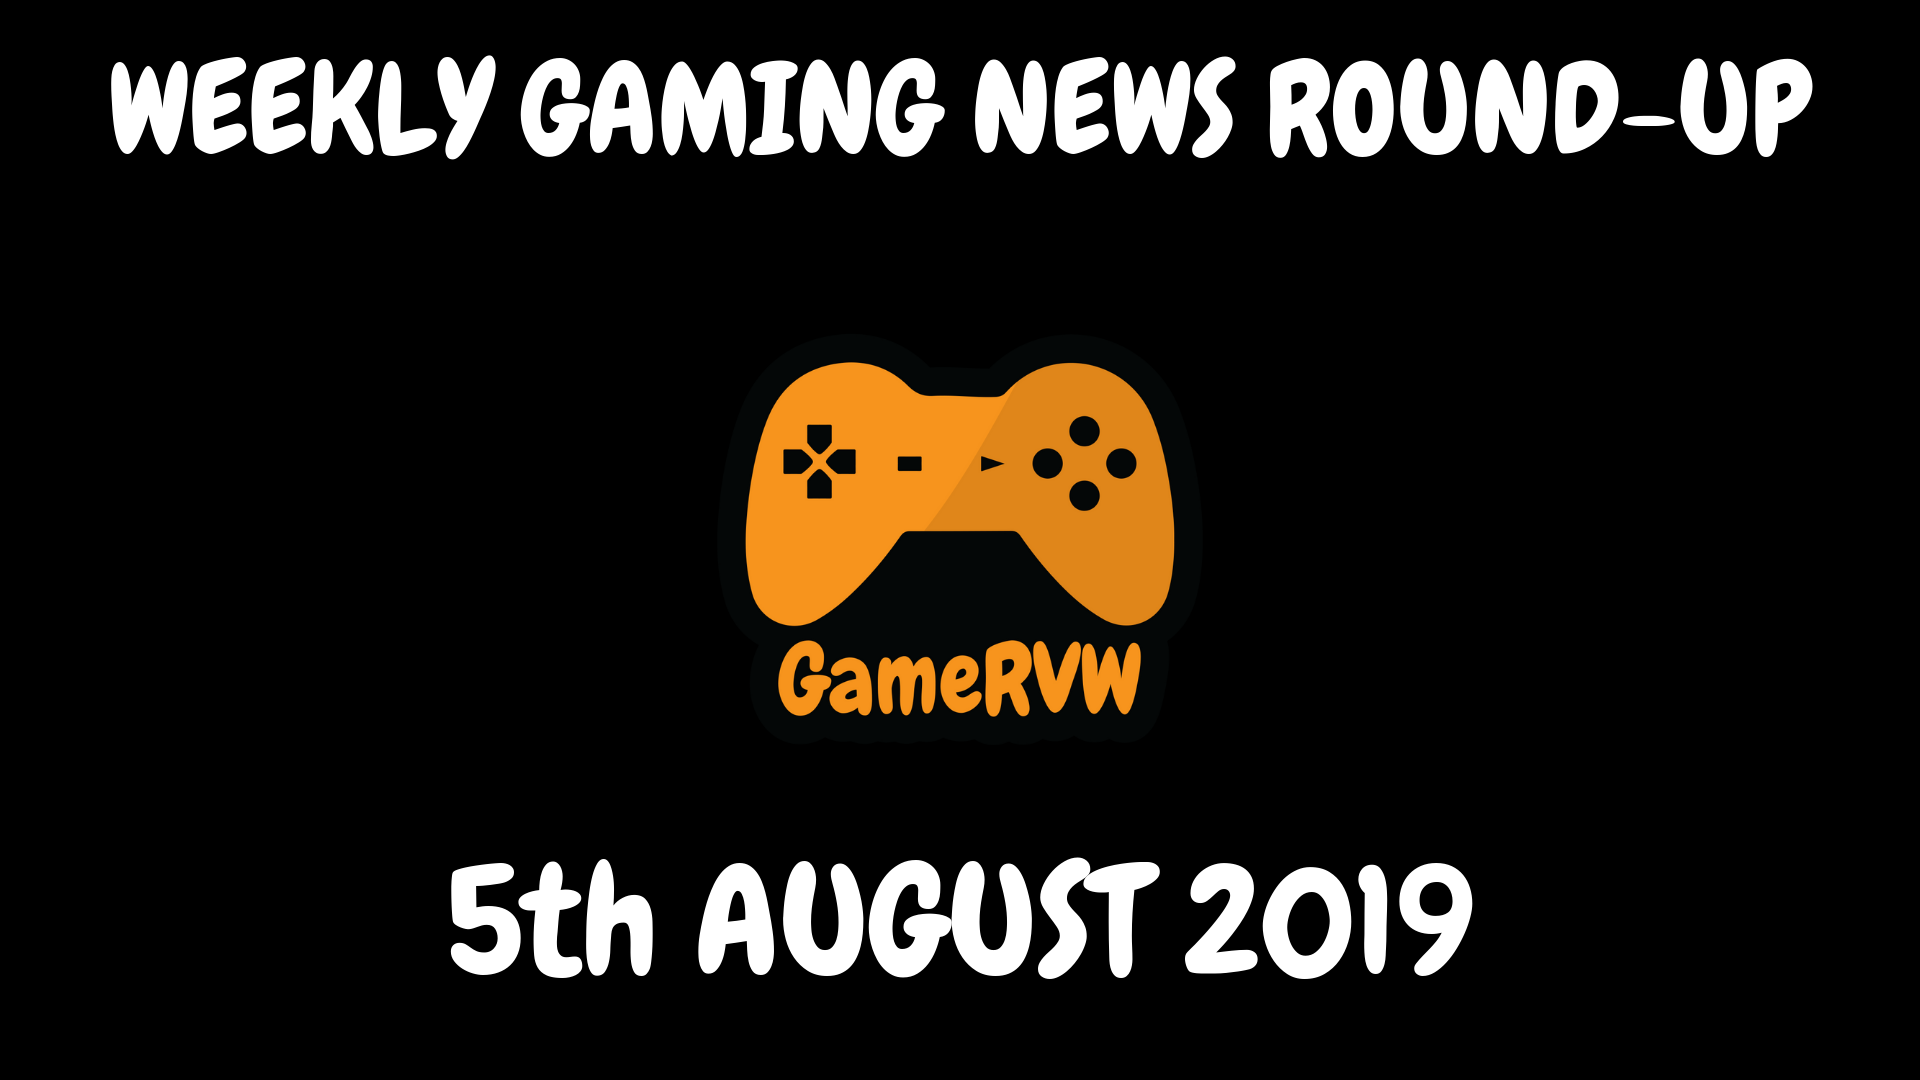 Gaming News of the Week